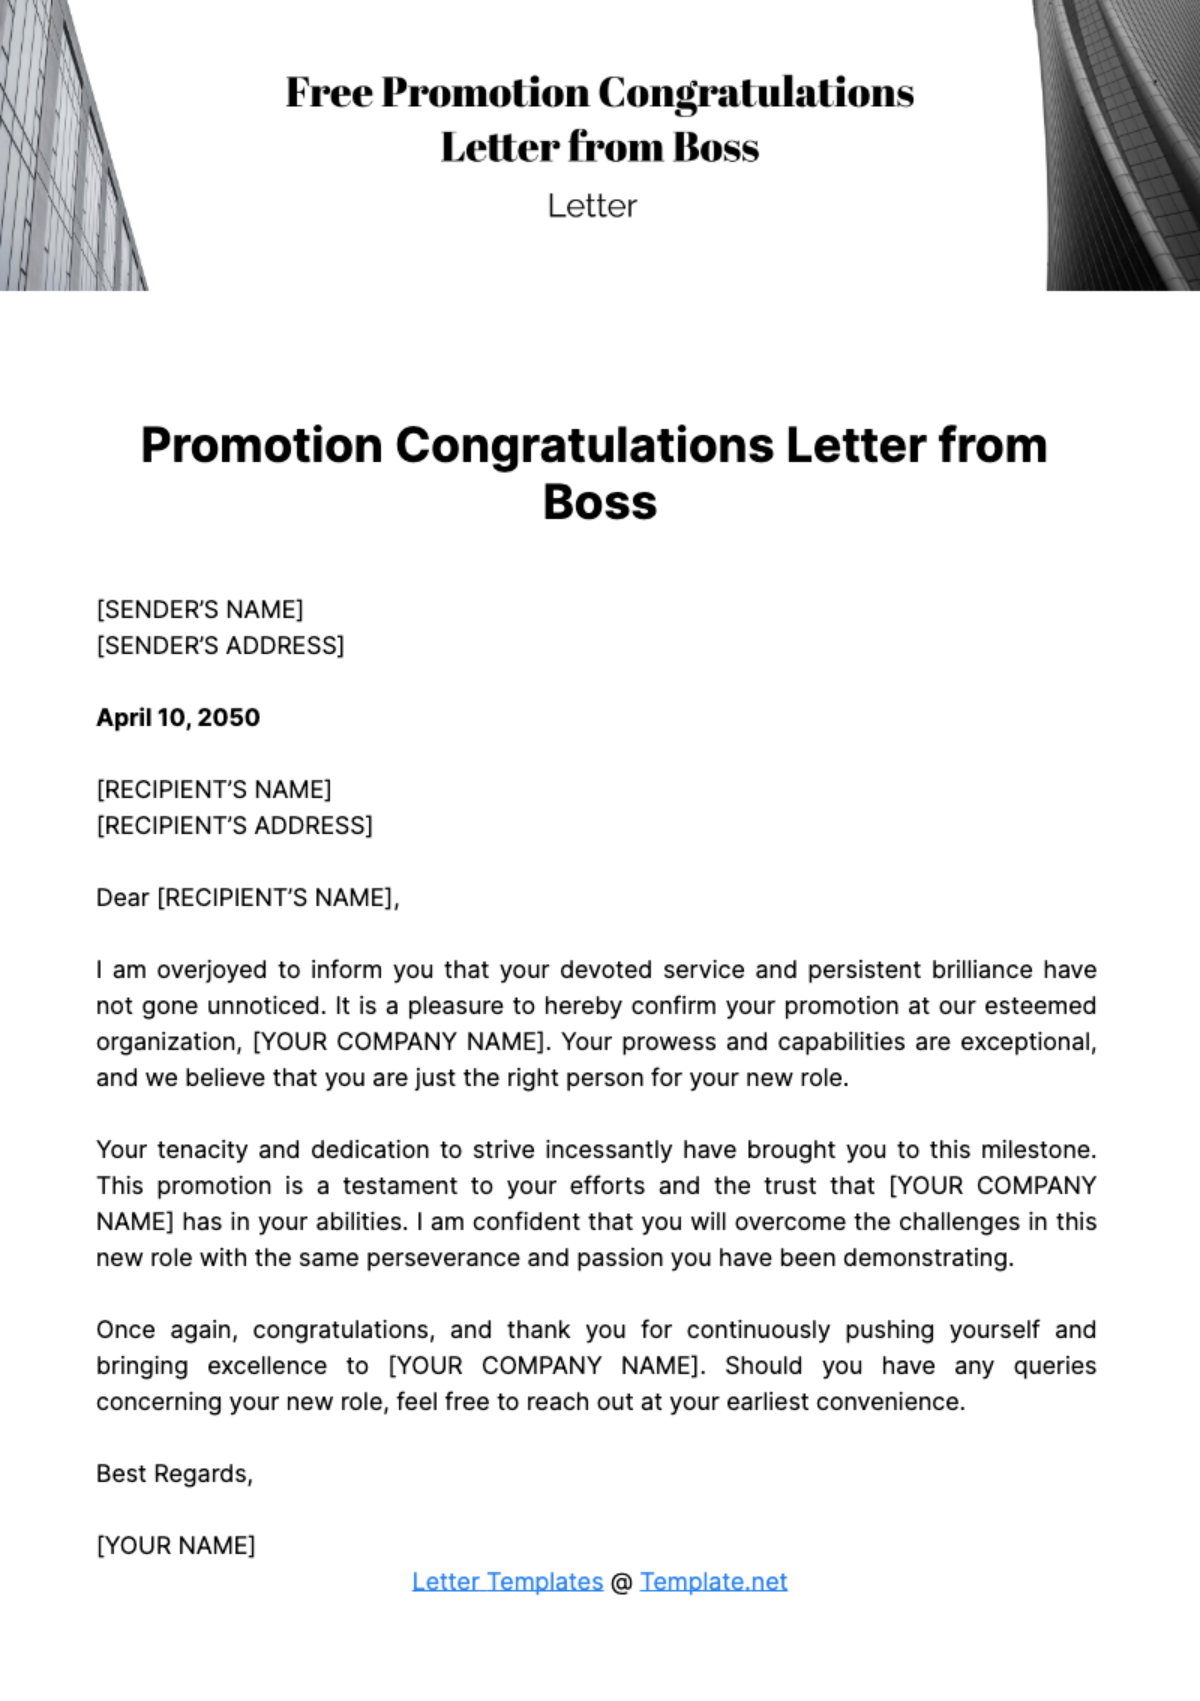 Promotion Congratulations Letter from Boss Template